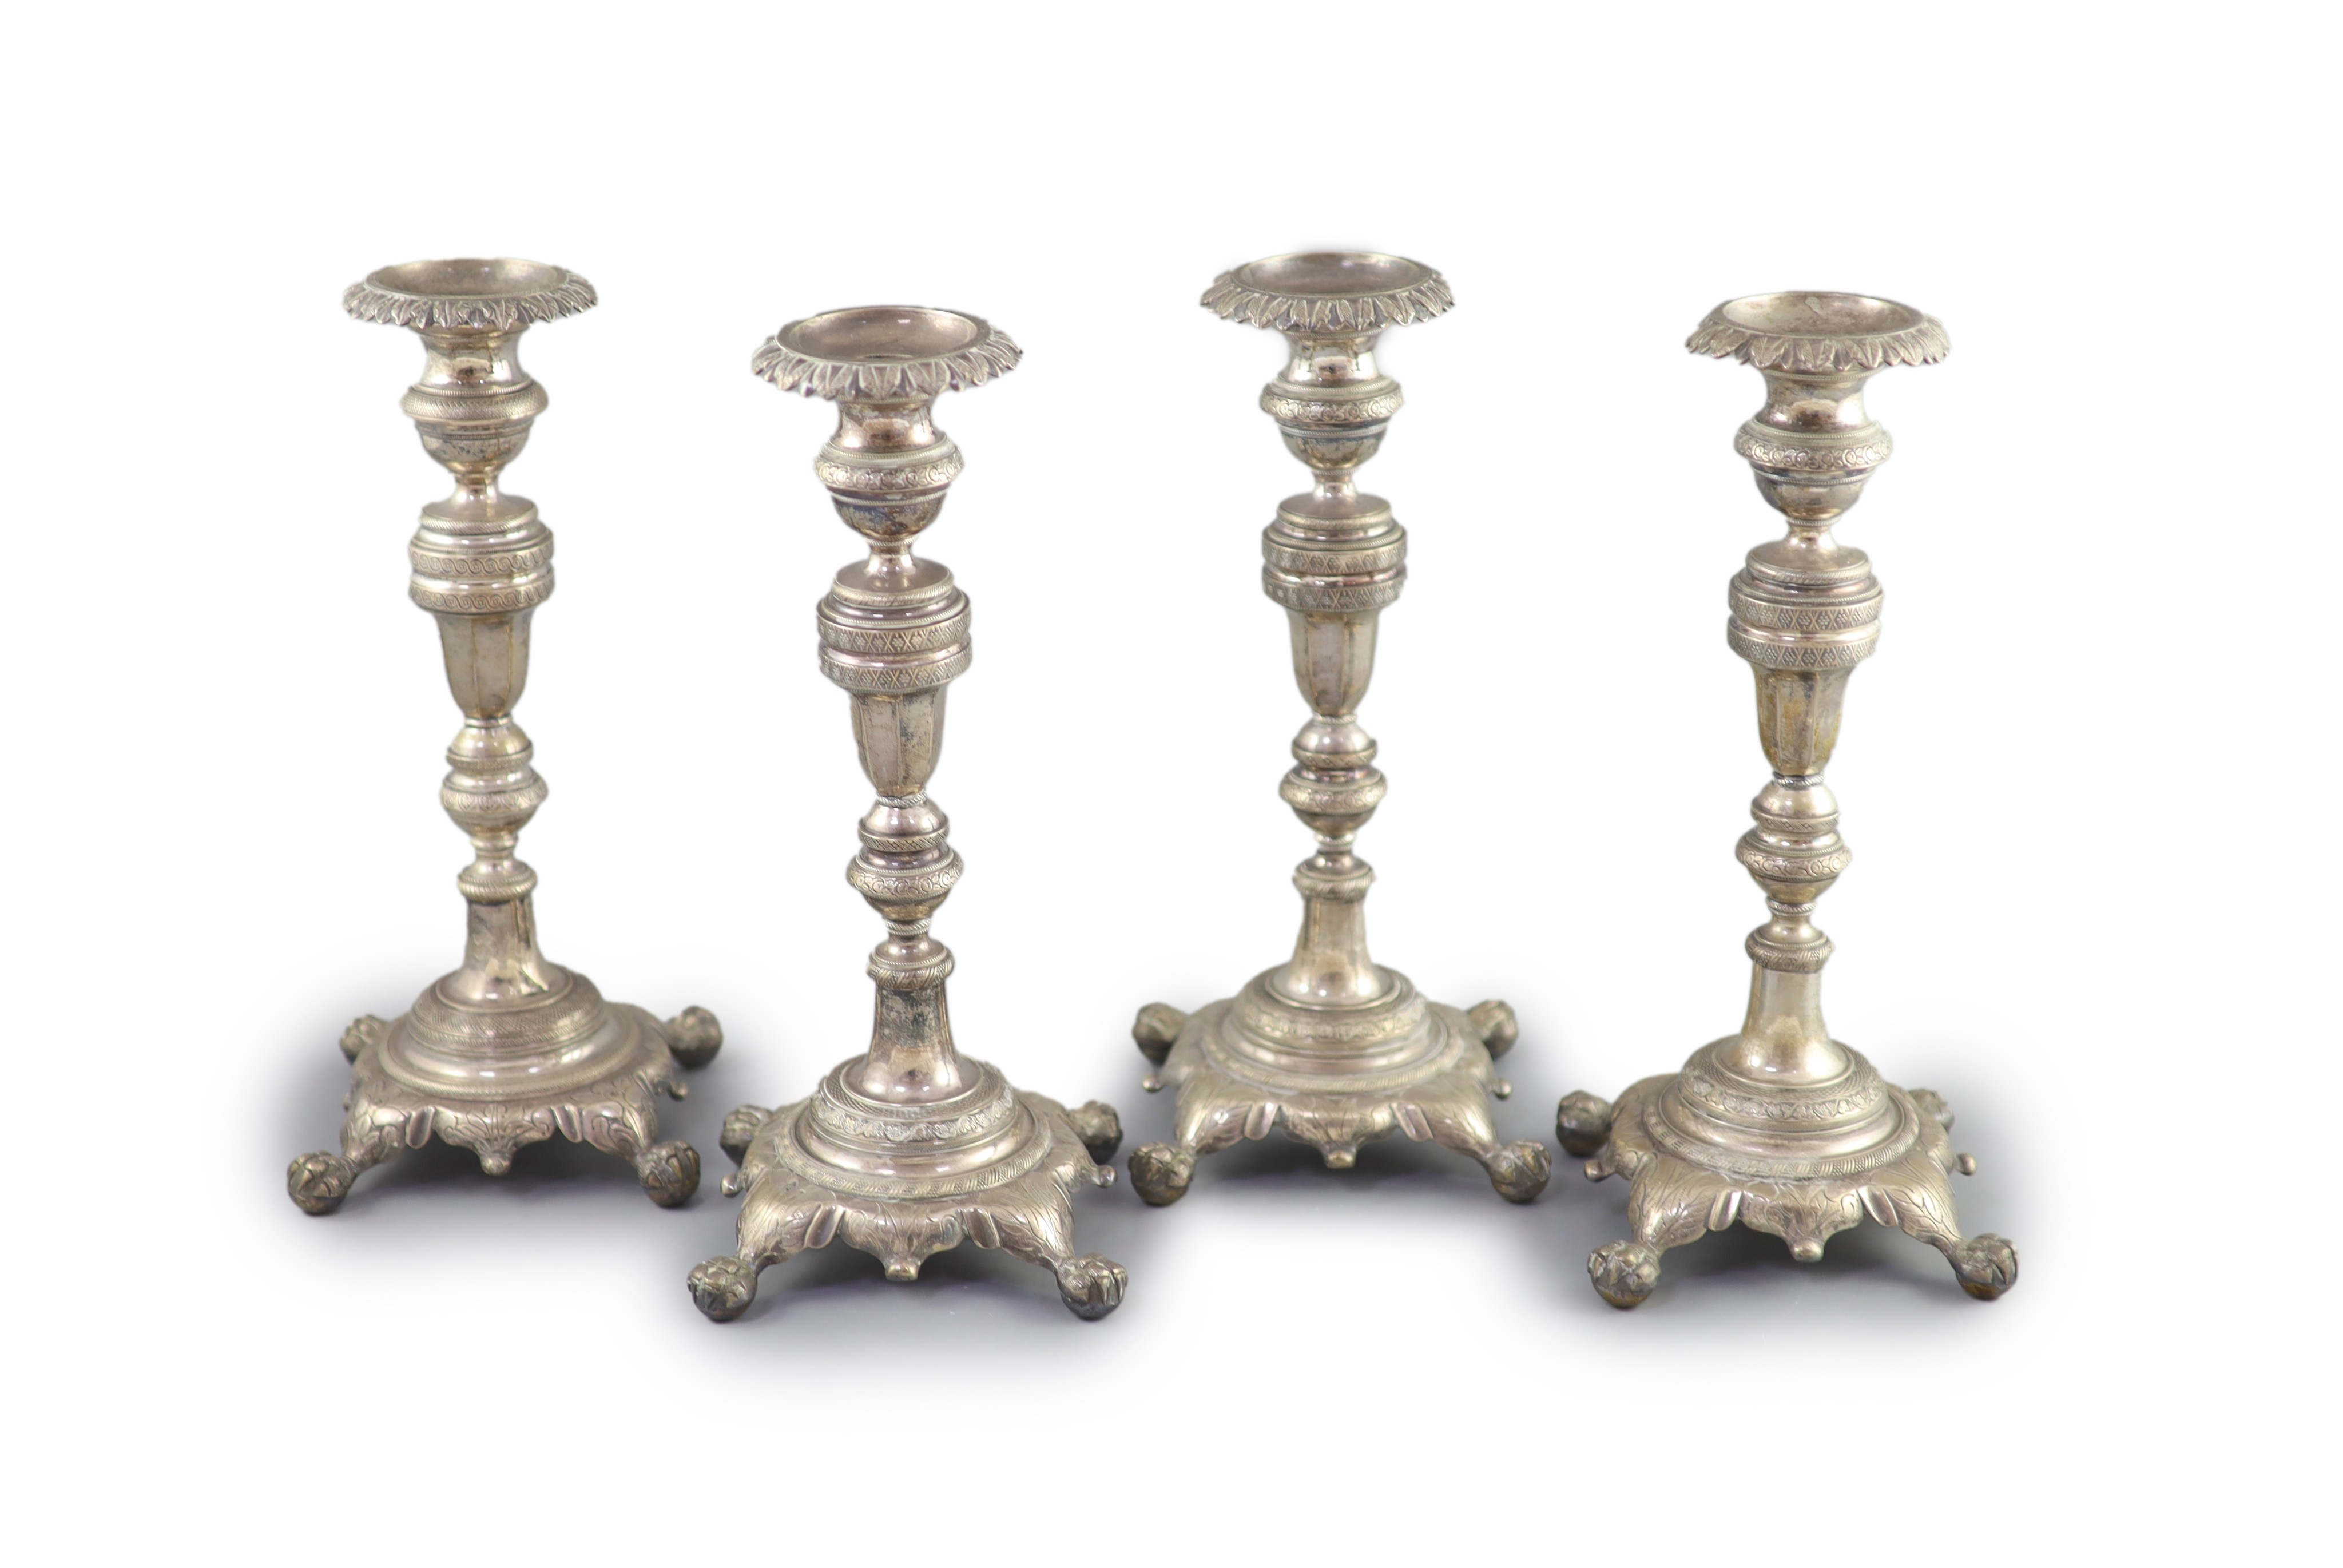 A set of four early 19th century South American? cast silver candlesticks